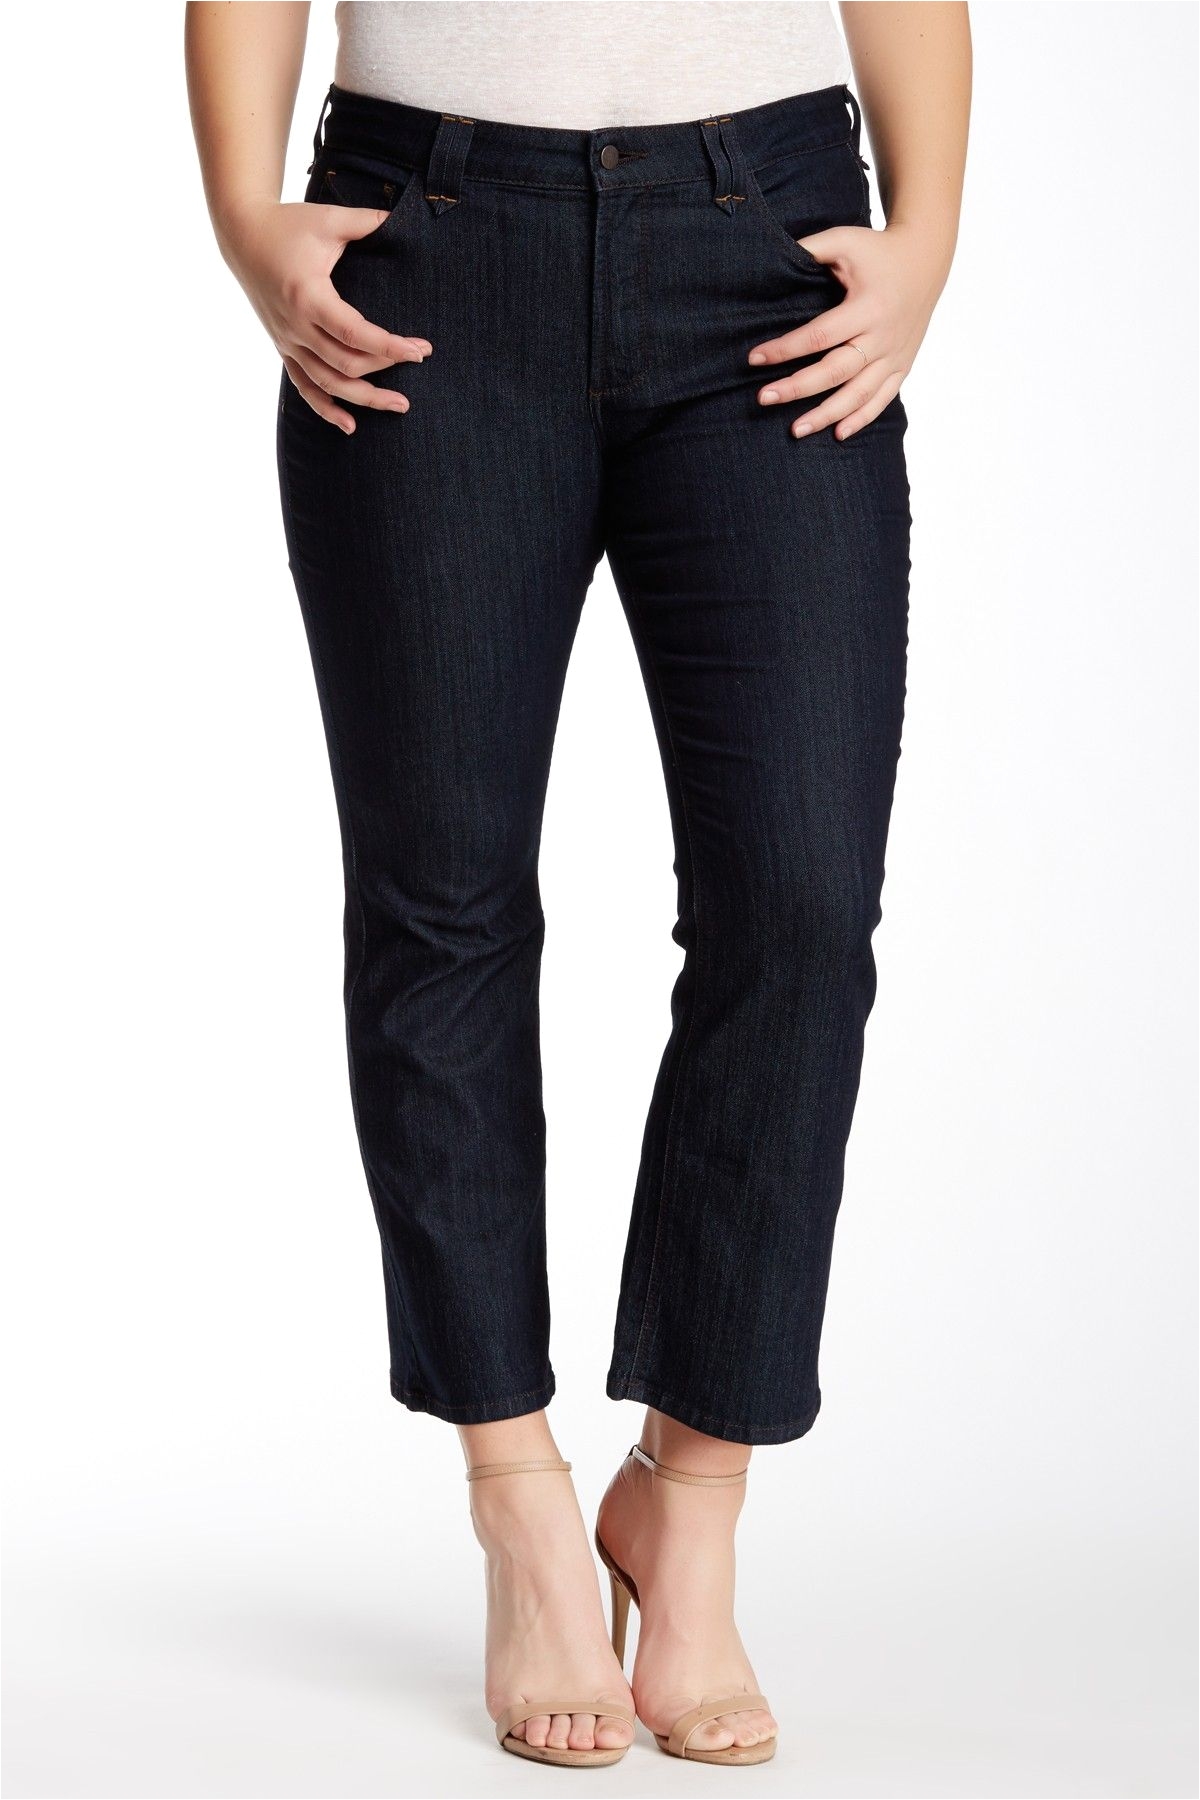 nydj hayden bootcut jean plus size at nordstrom rack free shipping on